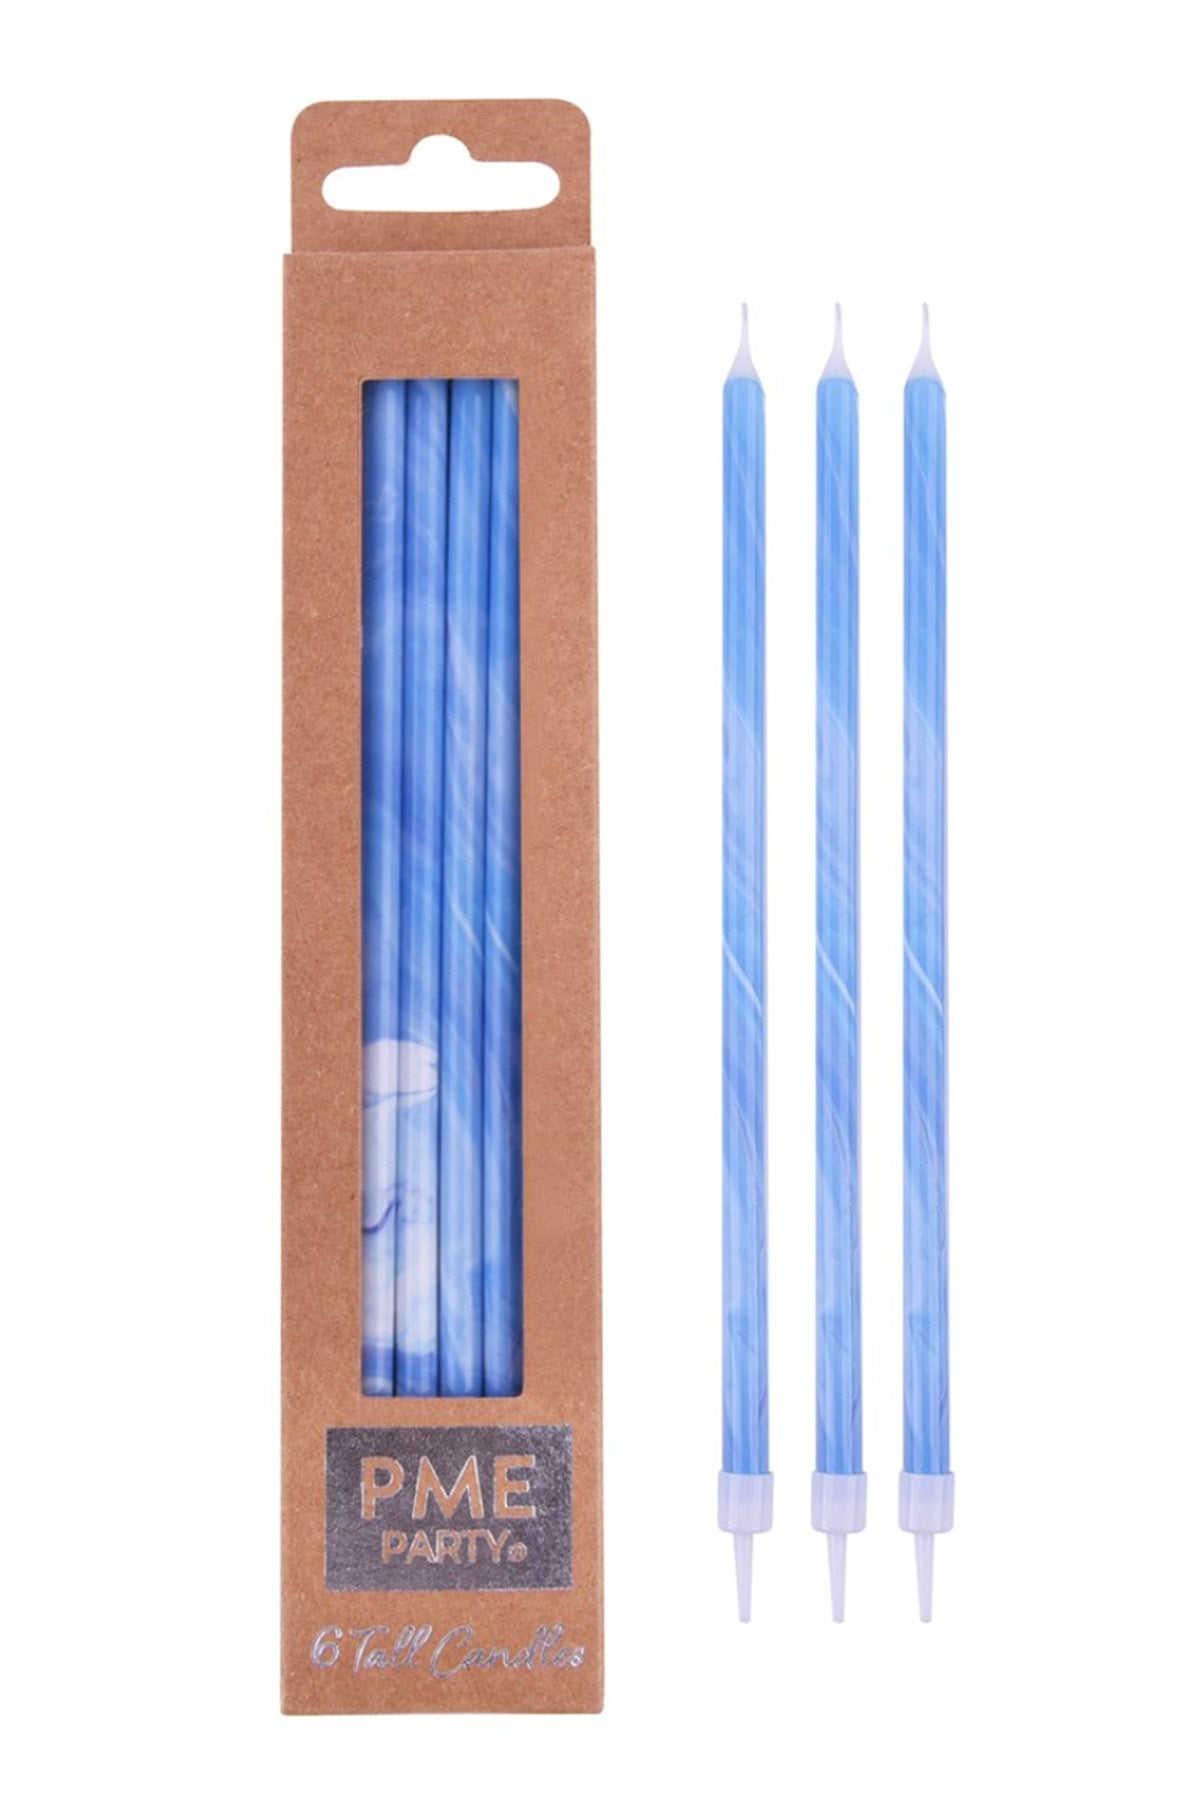 Candles - Blue Marble Extra Tall W/ Holders (7") - Pk/6 Birthday Candles PME 